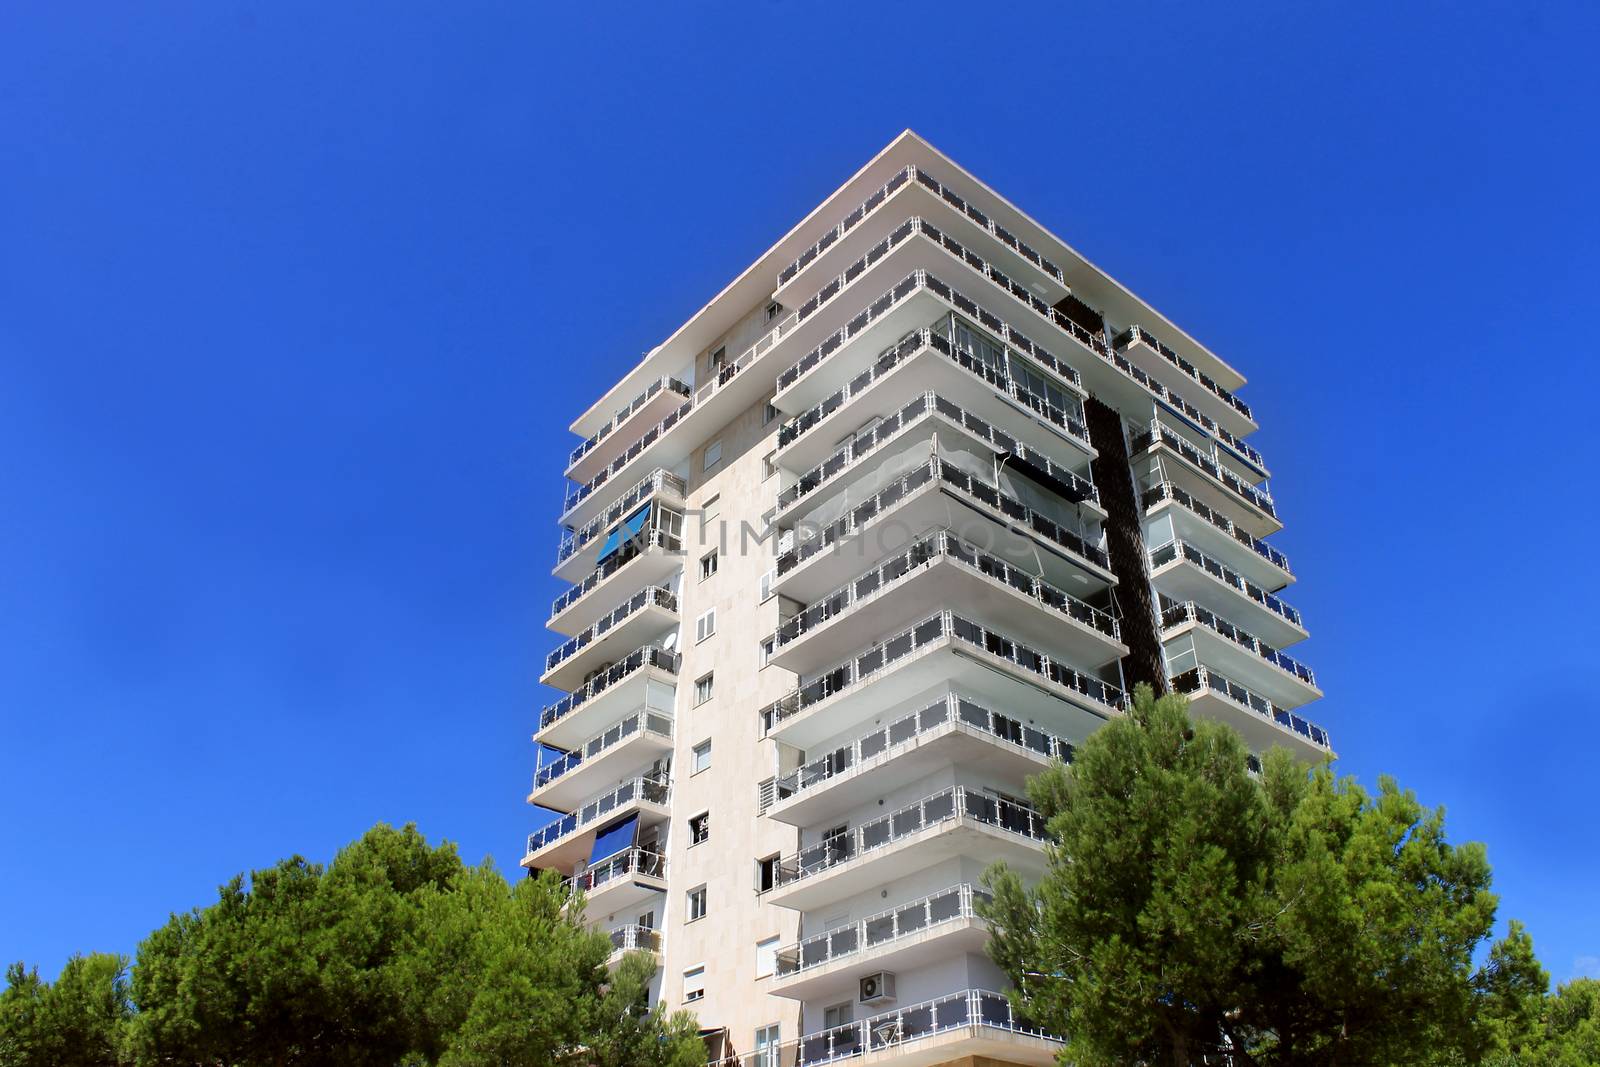 Exterior of a tall modern apartment building with blue sky background.